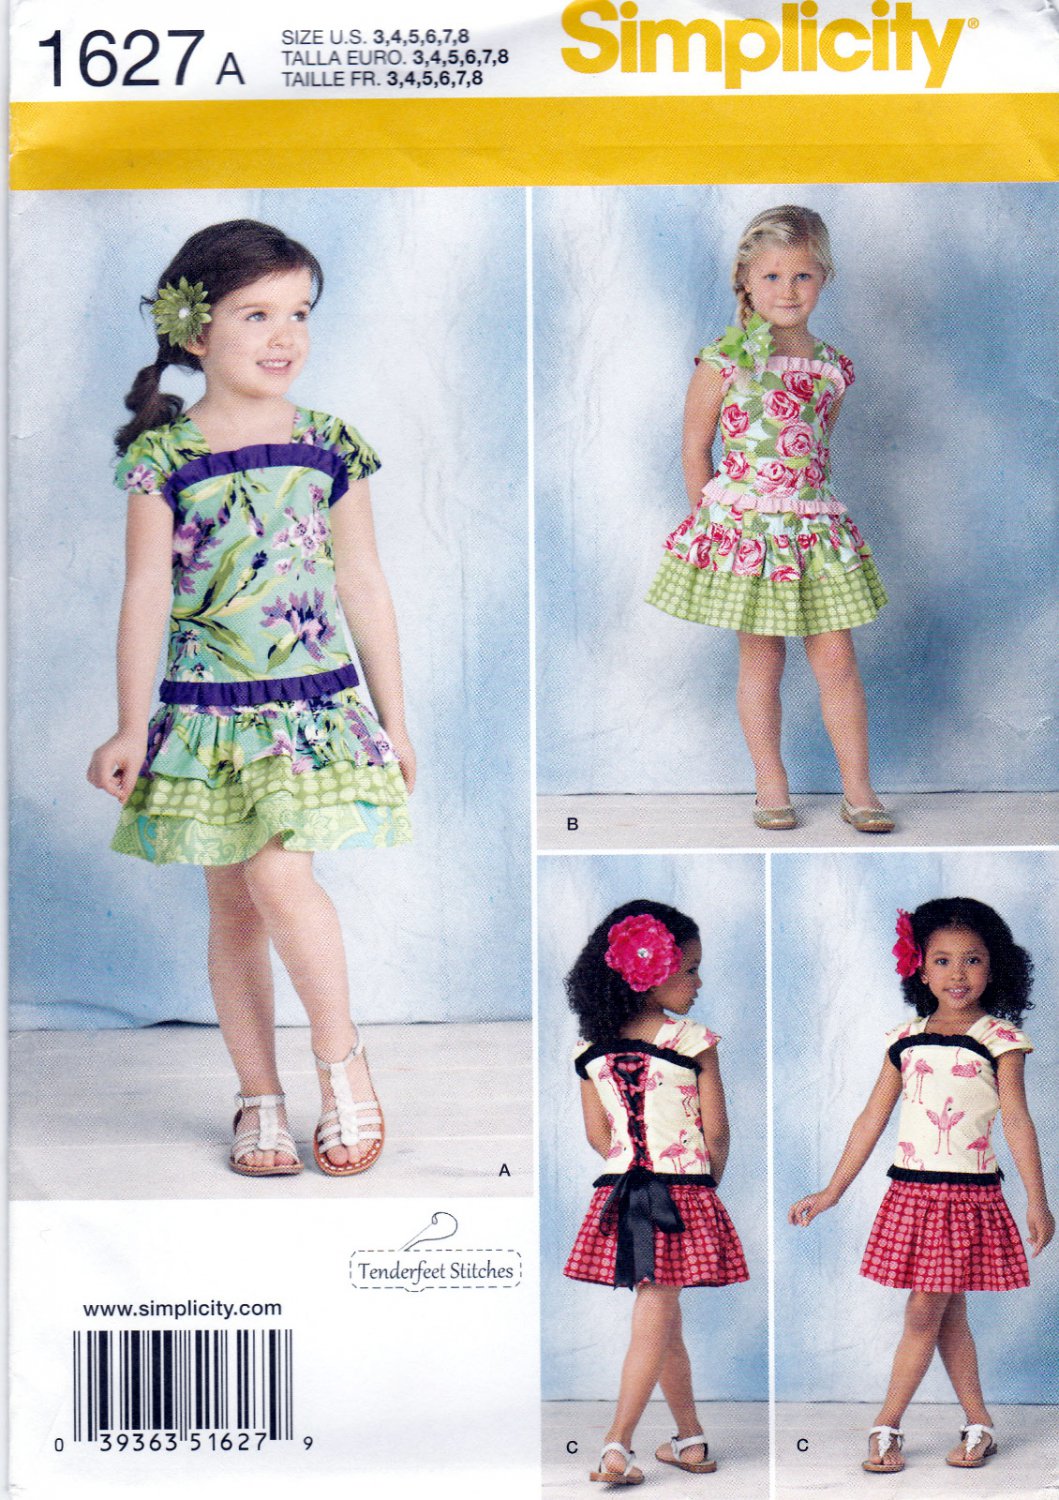 Simplicity 1627 Girls Sewing Pattern Childrens Tops and Skirts Kids Sizes 3-4-5-6-7-8